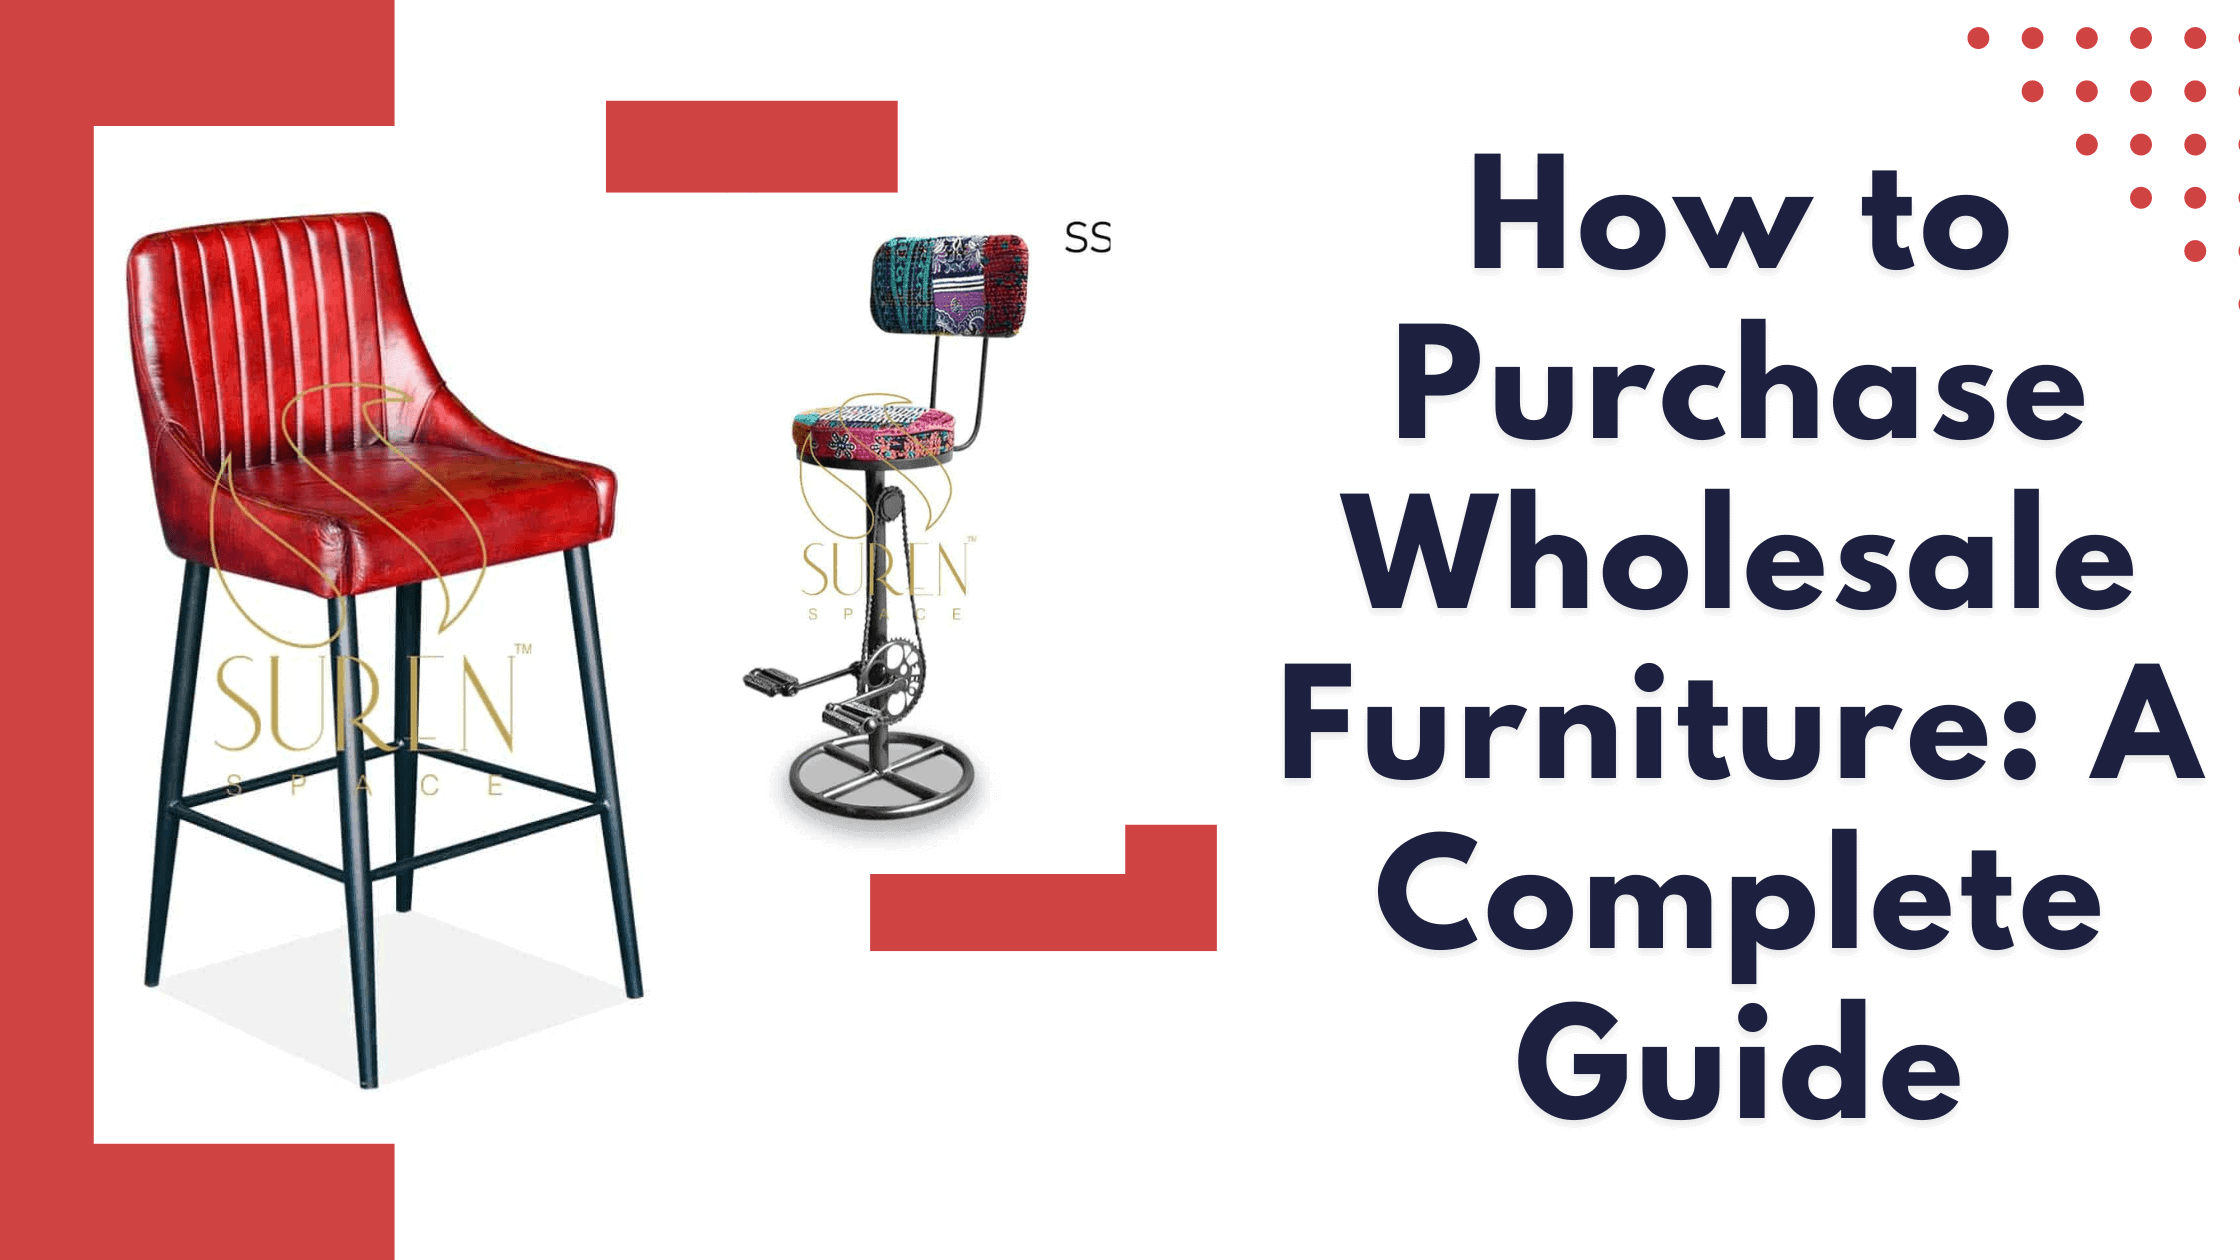 How to Purchase Wholesale Furniture A Complete Guide - SUREN SPACE